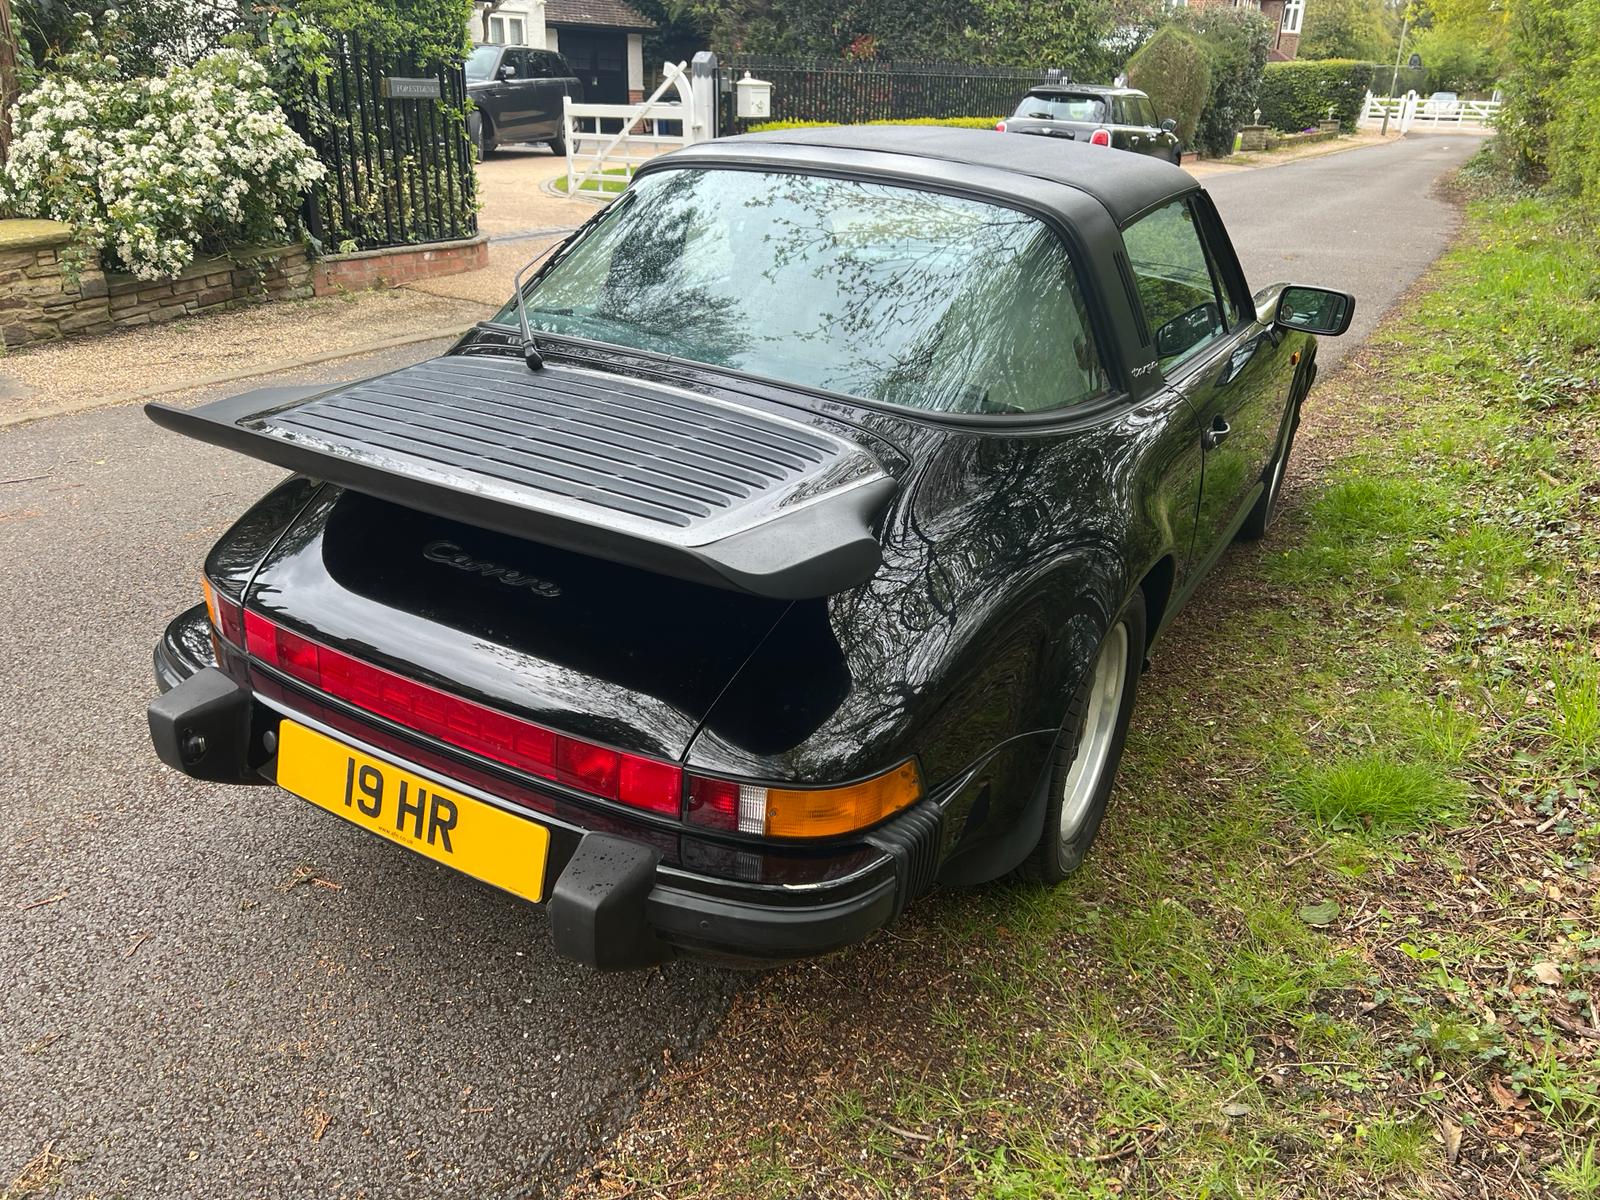 1988 Porsche Carrera Targa 3.2 - 61,000 miles of which only 3500 in past 25 years with current owner - Image 5 of 15